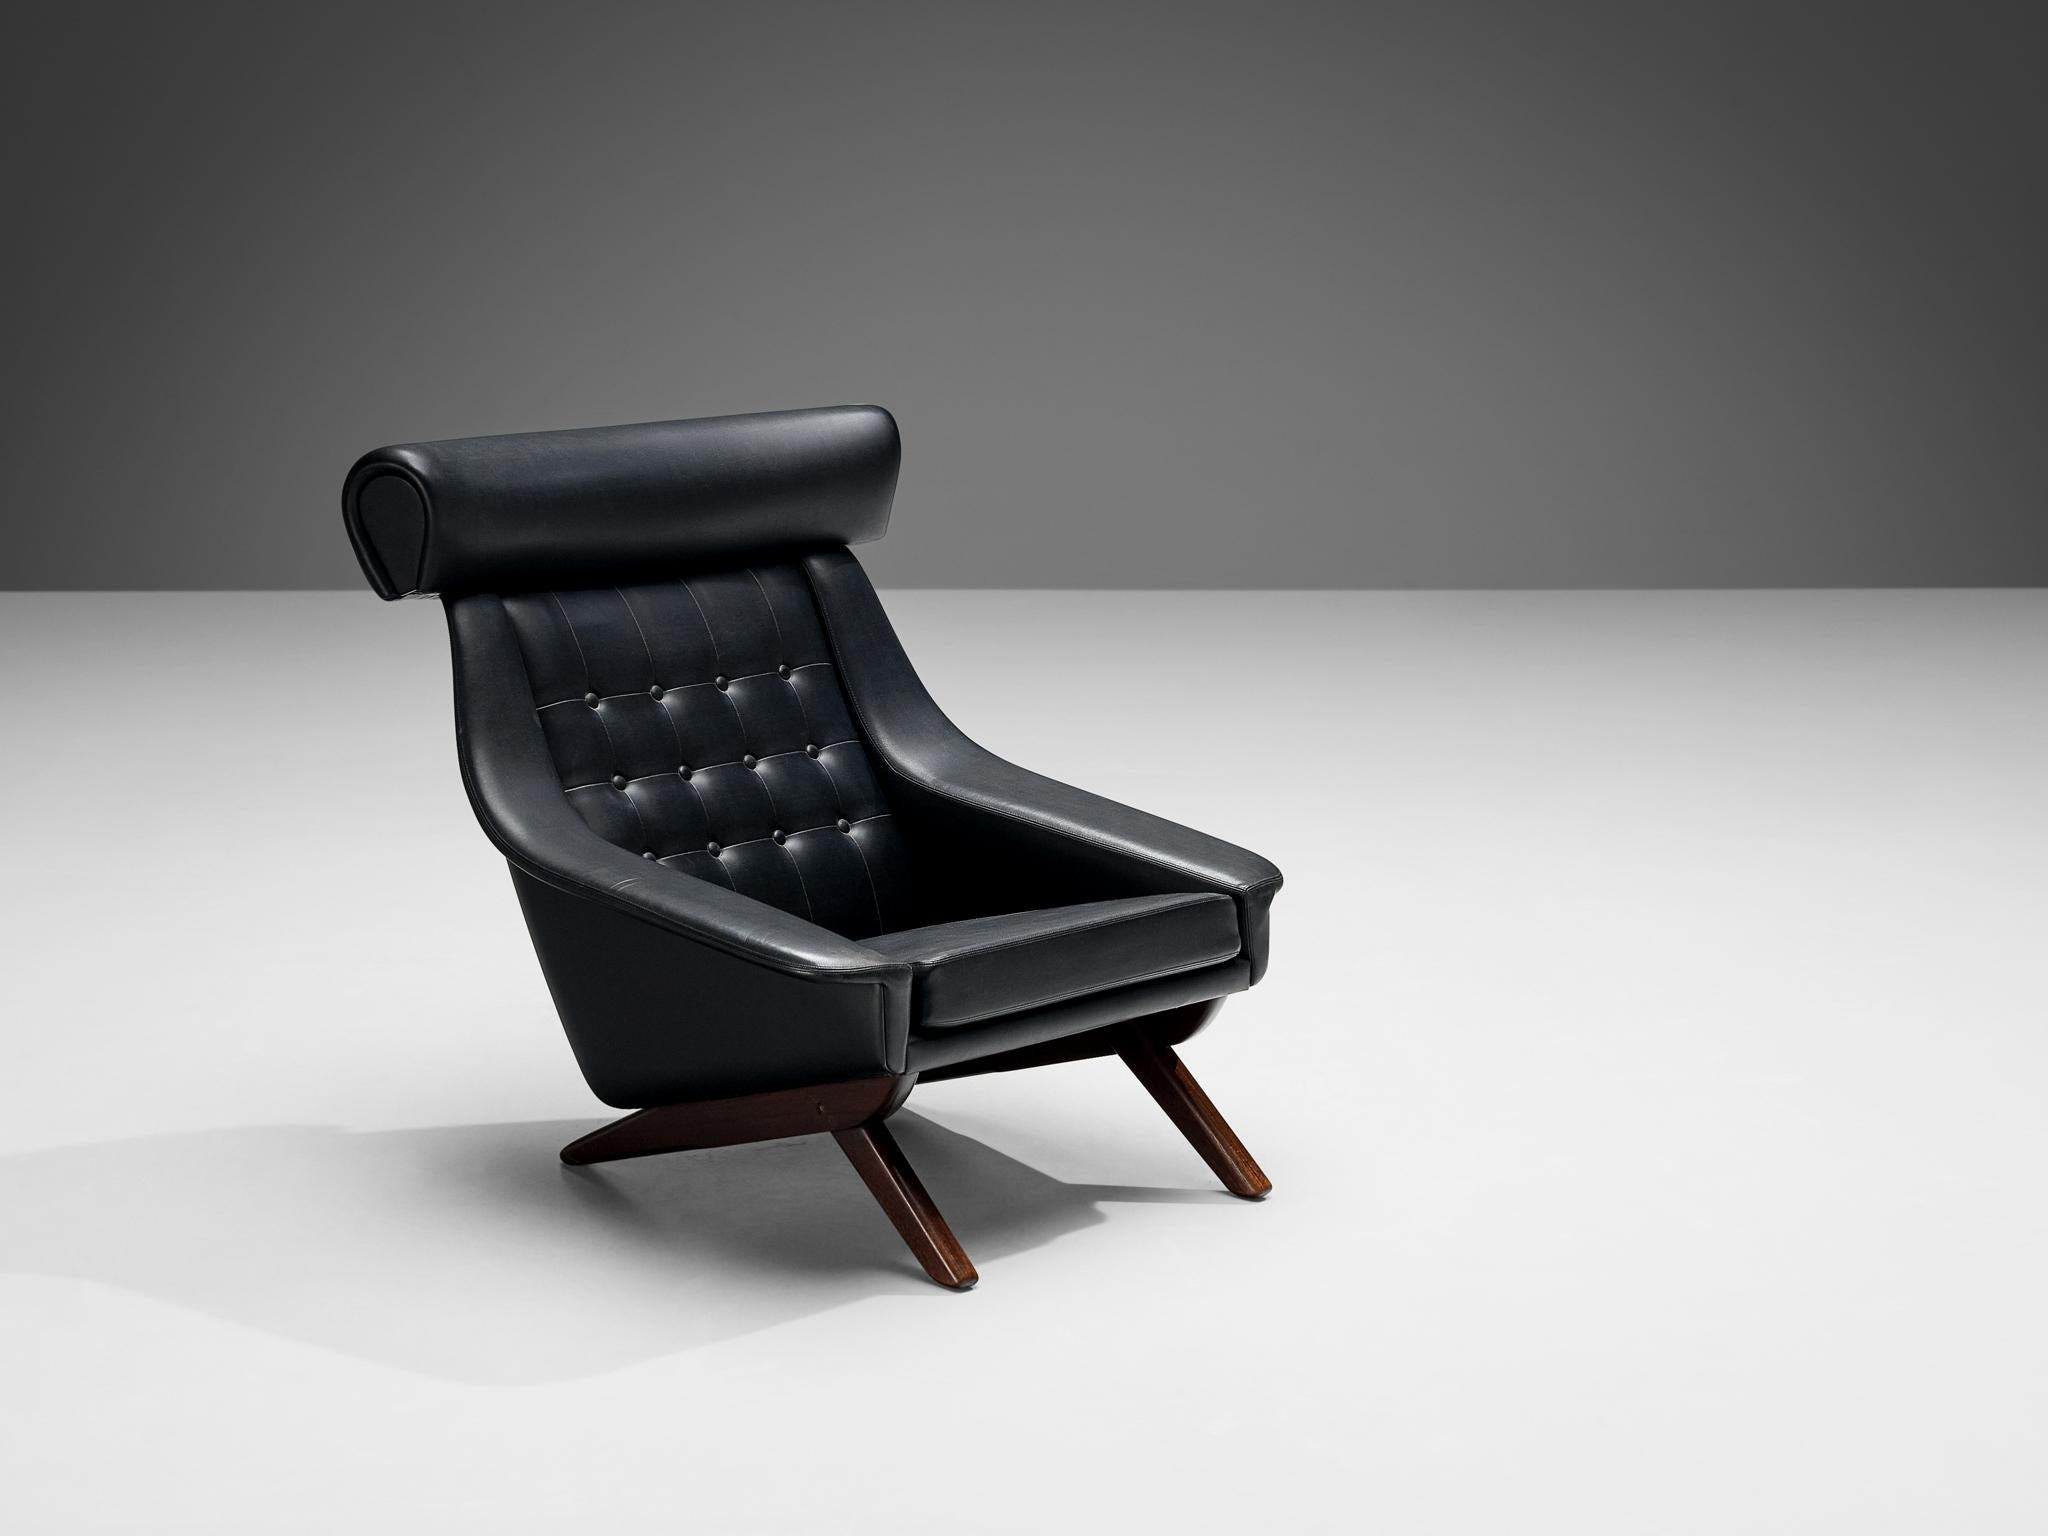 Illum Wikkelsø, 'Ox' lounge chair, black leatherette, teak, Denmark 1960s.

Well-designed easy chair in black leatherette upholstery by Danish designer Illum Wikkelsø. This 'Ox Chair' shows some interesting details. For instance, the wide and large